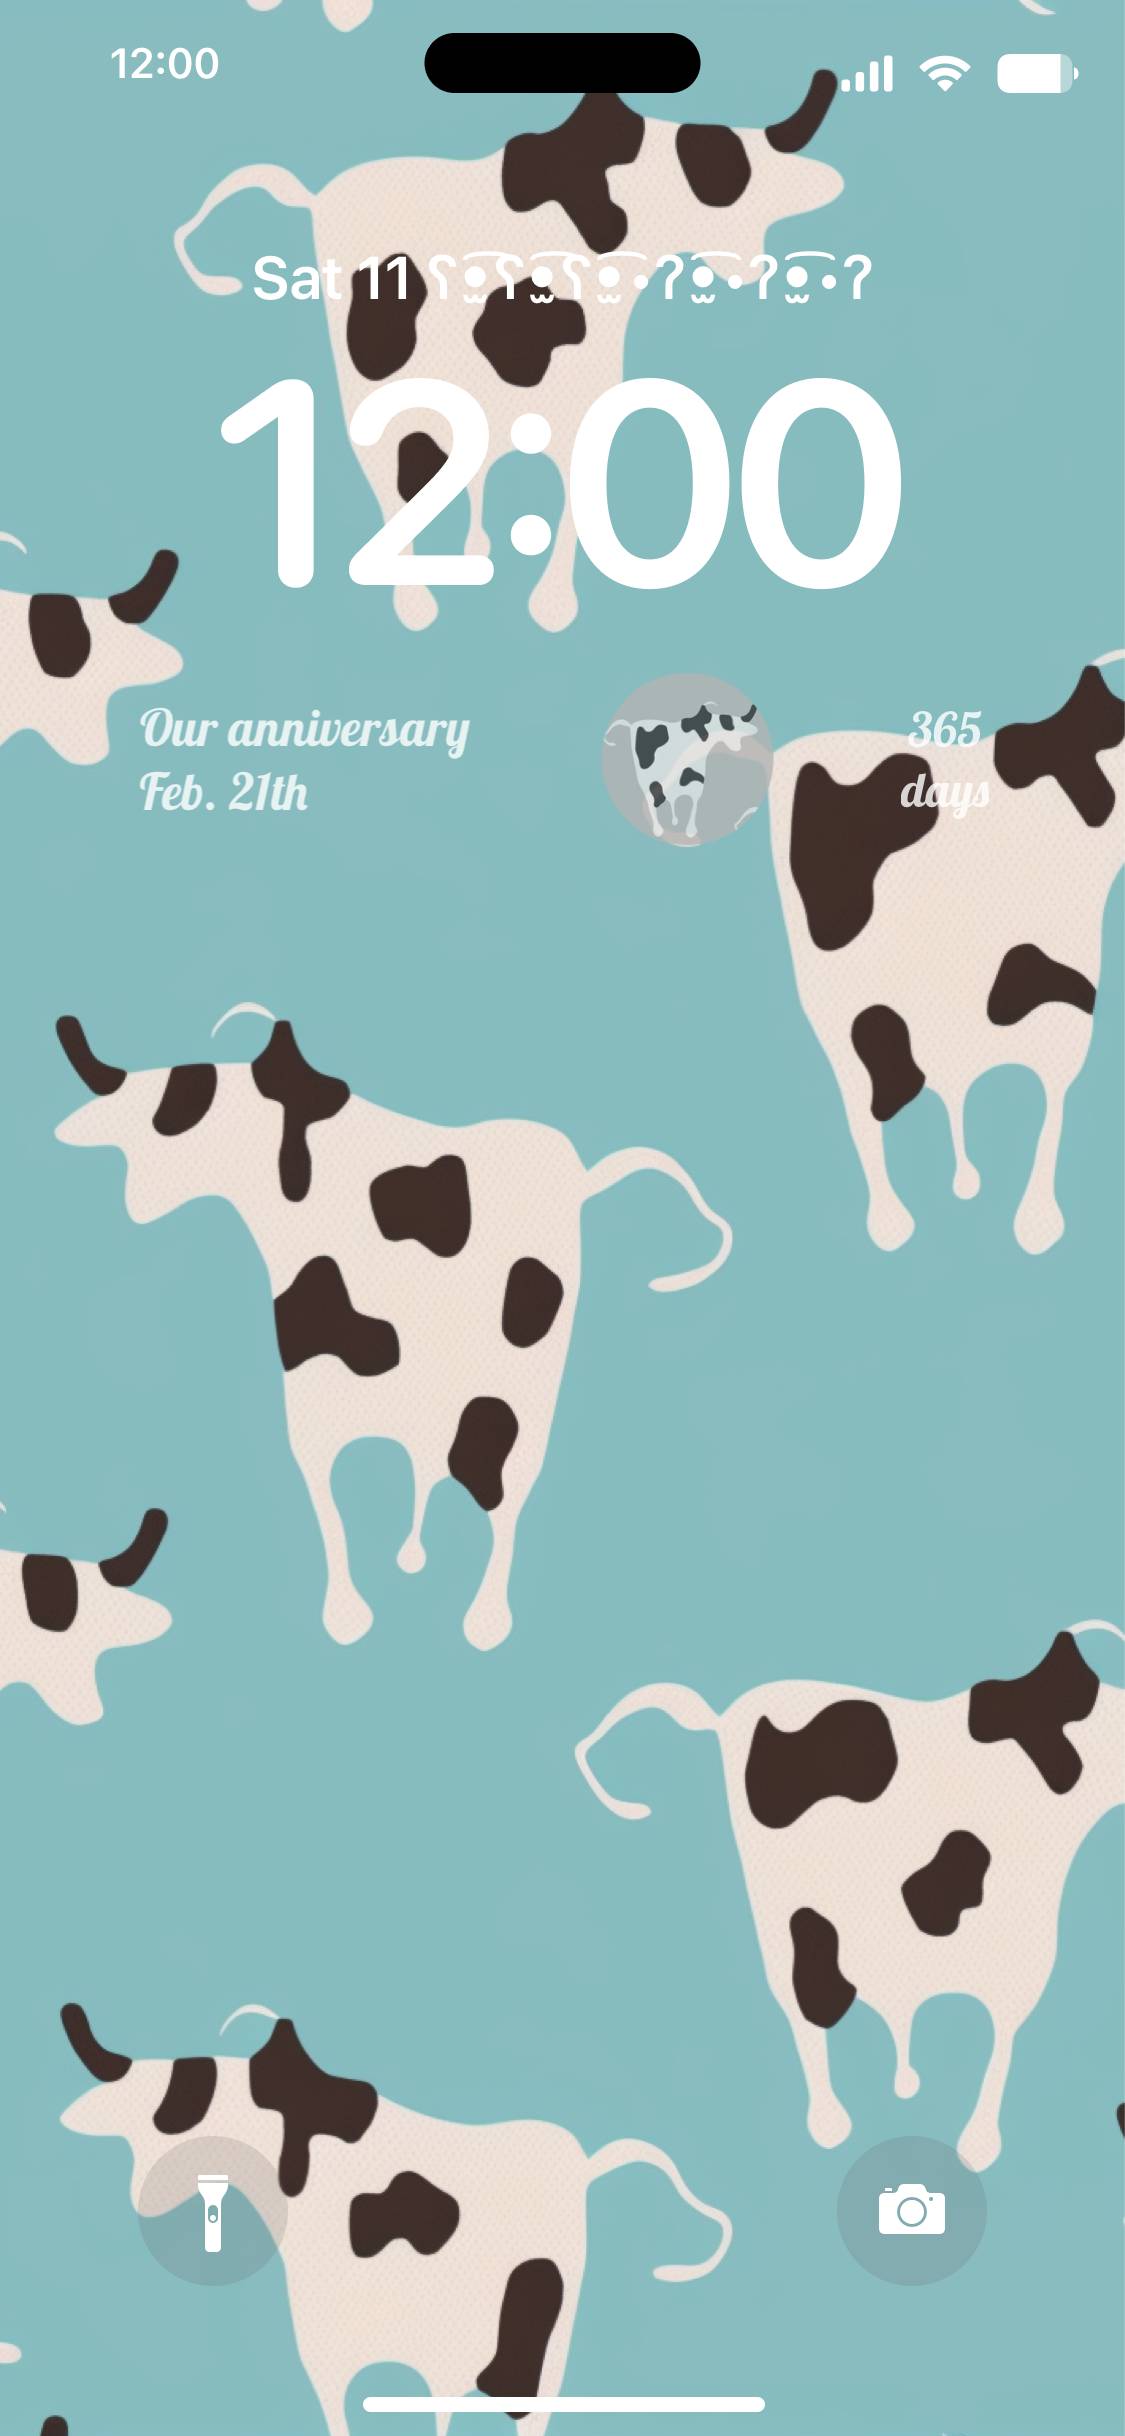 A phone screen with cows on it - Cow